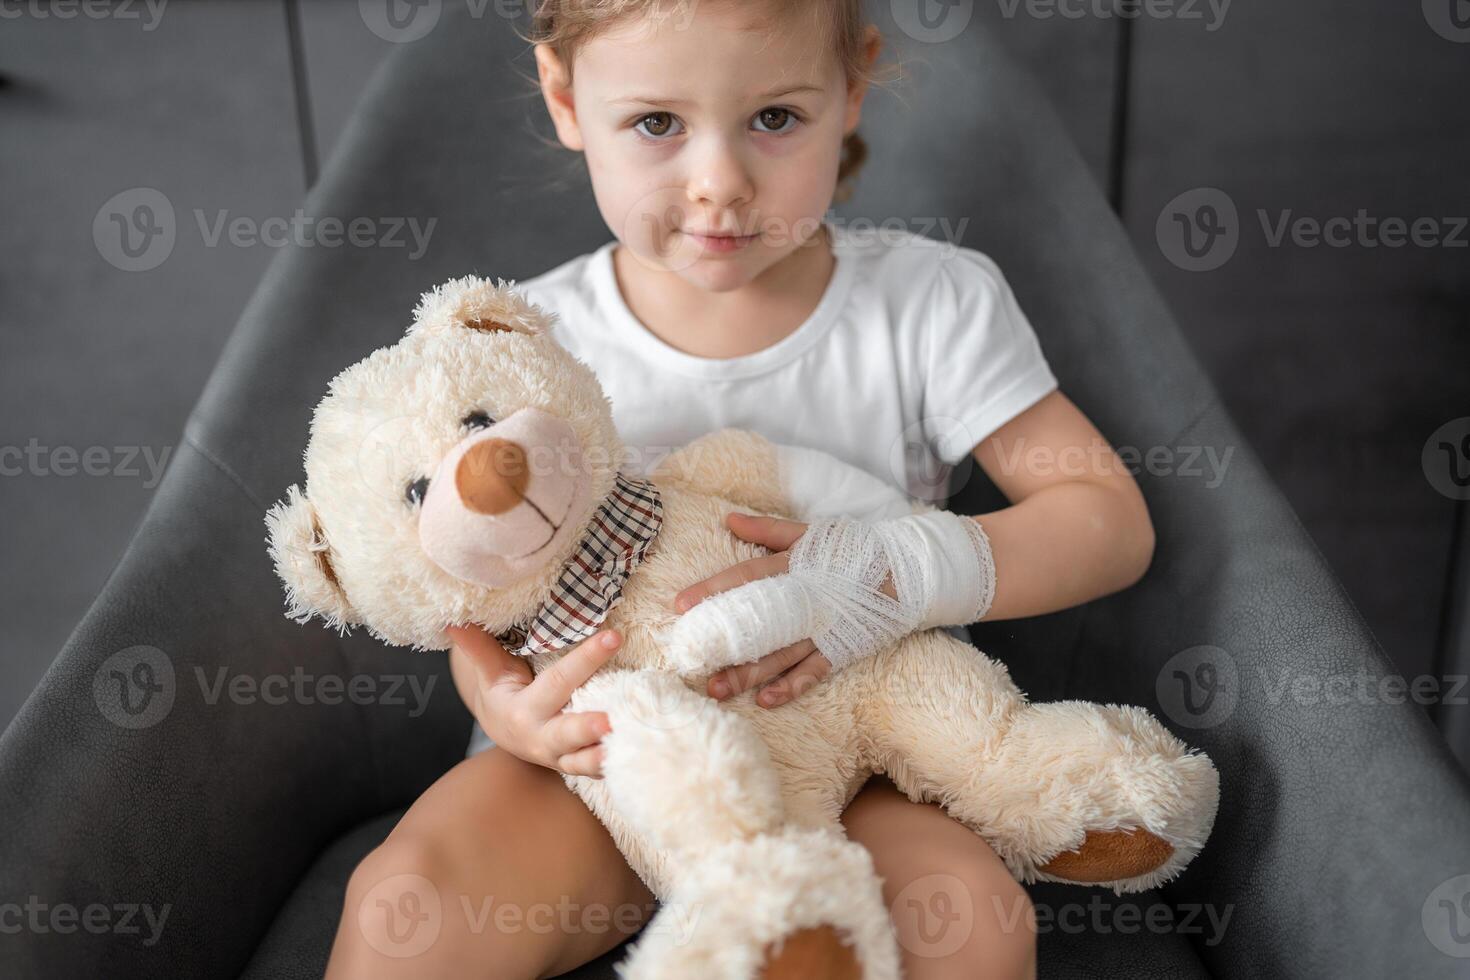 Little girl with broken finger holds teddy bear with a bandaged paw at the doctor's appointment in the hospital photo